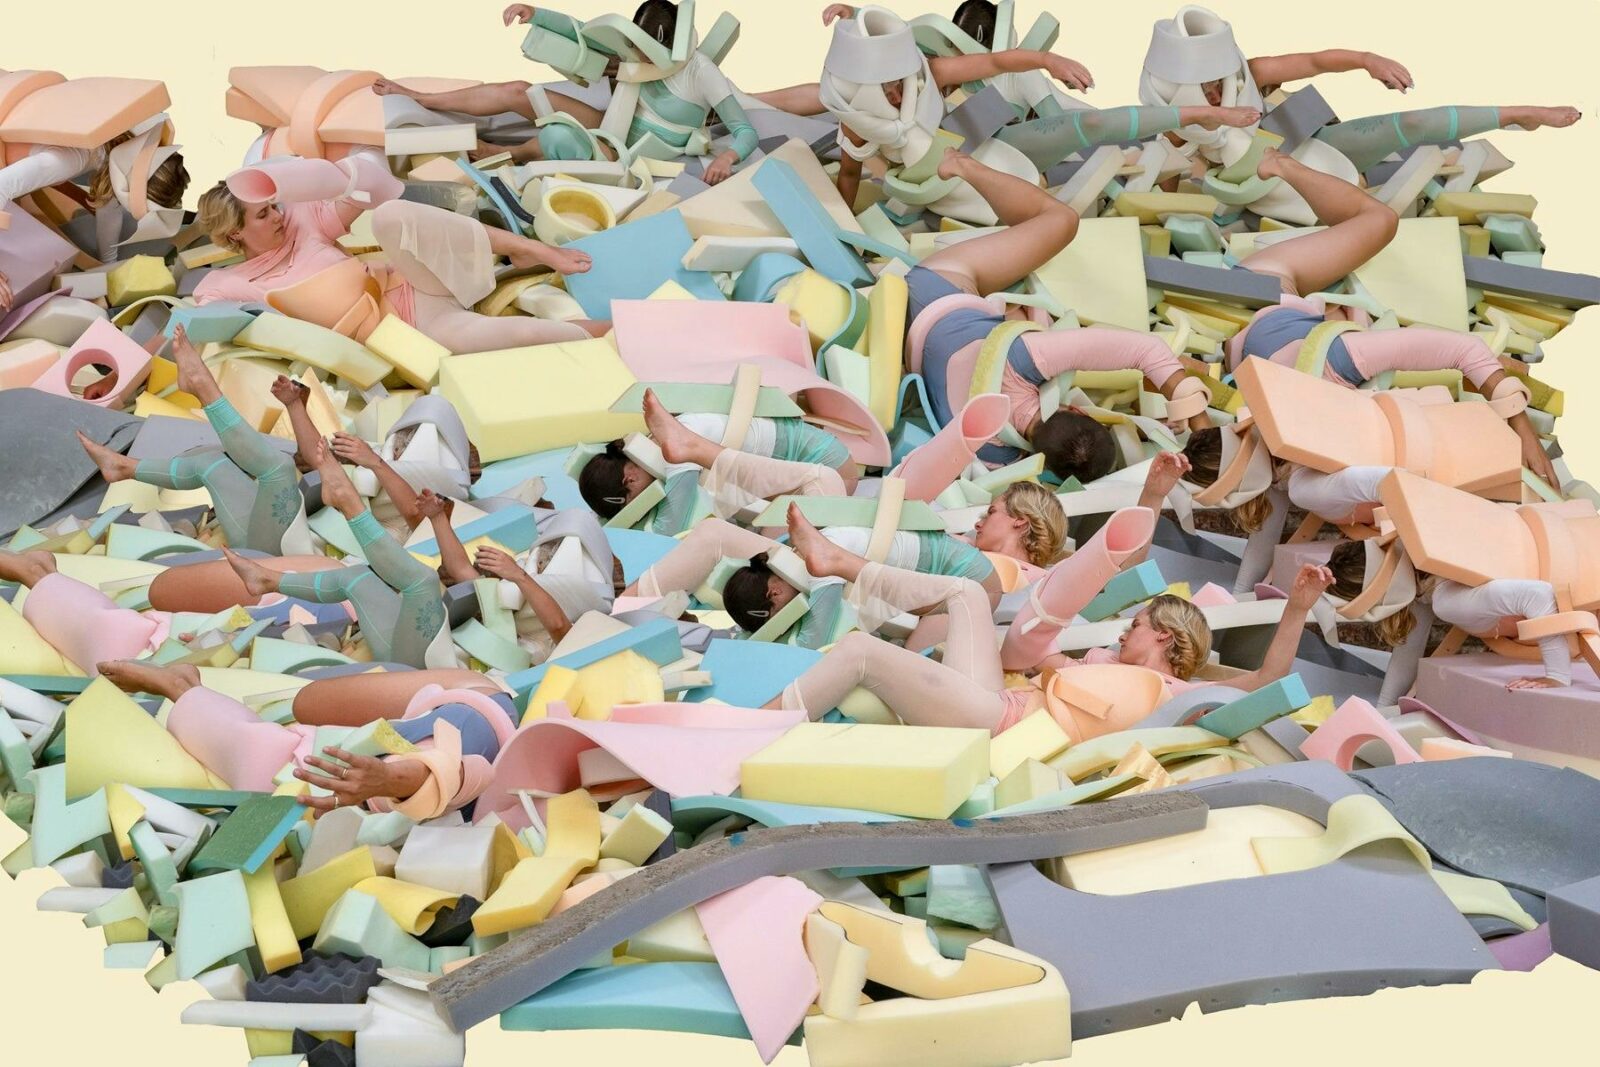 Bodies a strewn amongst colouful foam shapes, a messy landscape of sorts